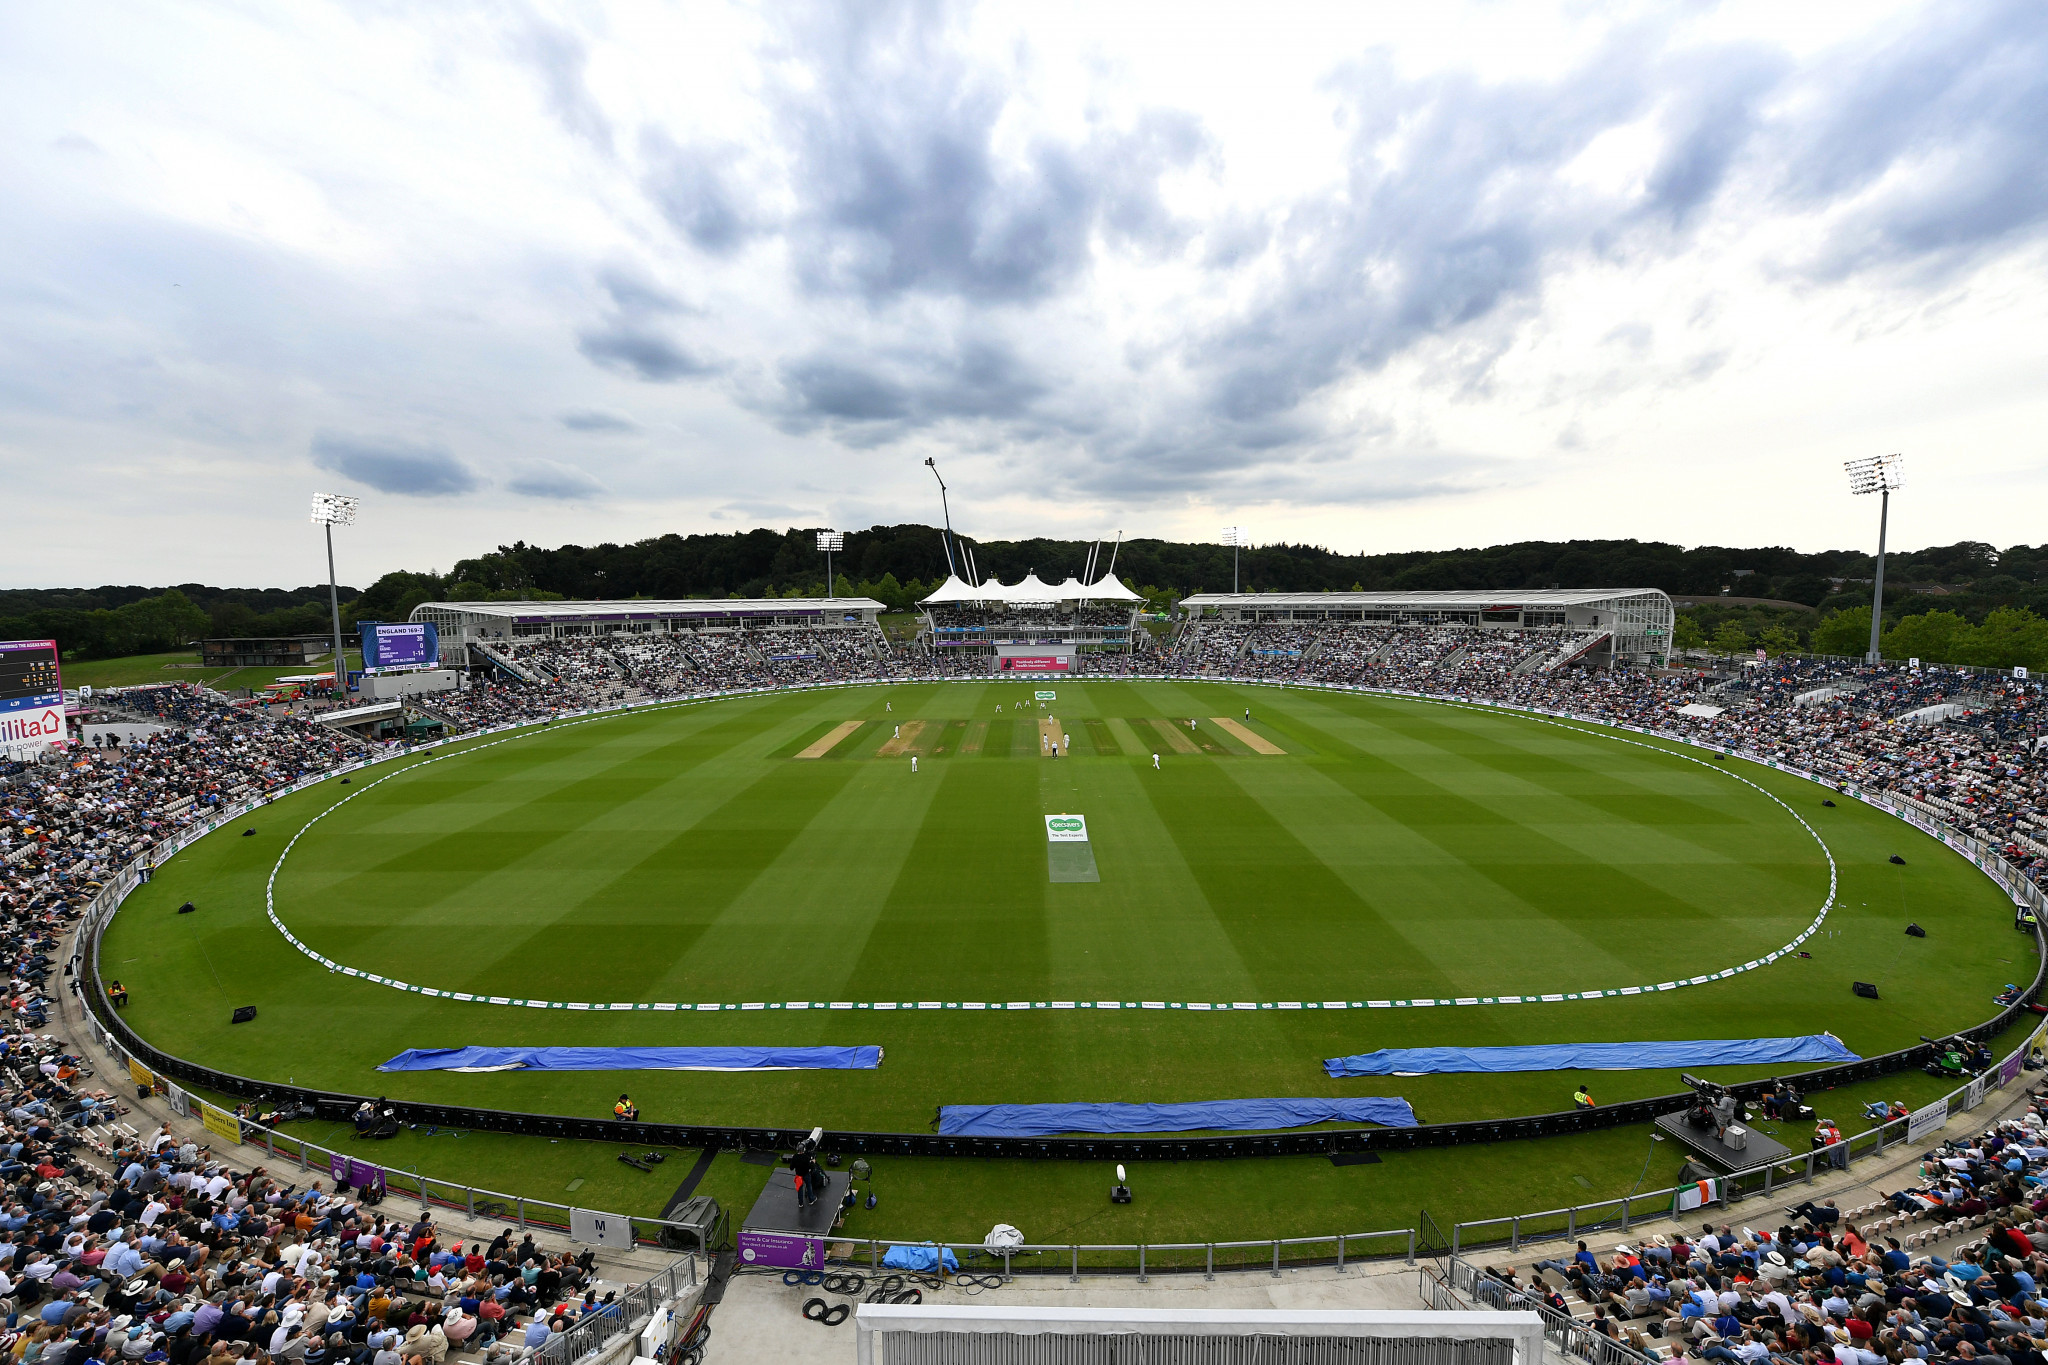 The Hampshire Bowl in Southampton is set to host the World Test Championship Final in a  bio-secure environment ©Getty Images